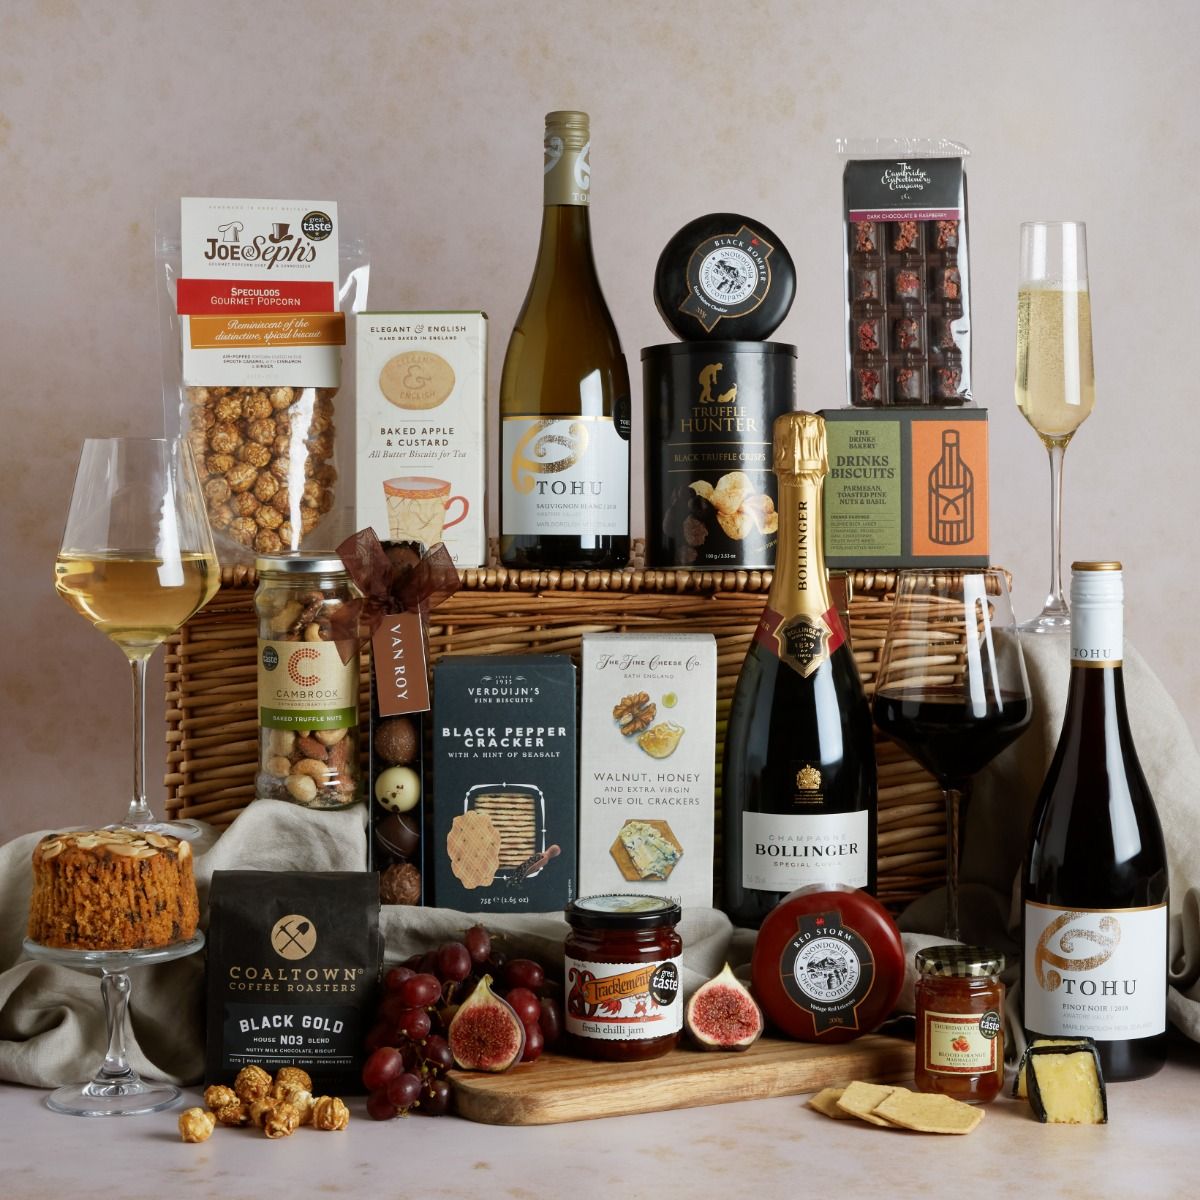 The Deluxe Hamper with contents on display and glasses of red and white wine, with wicker basket